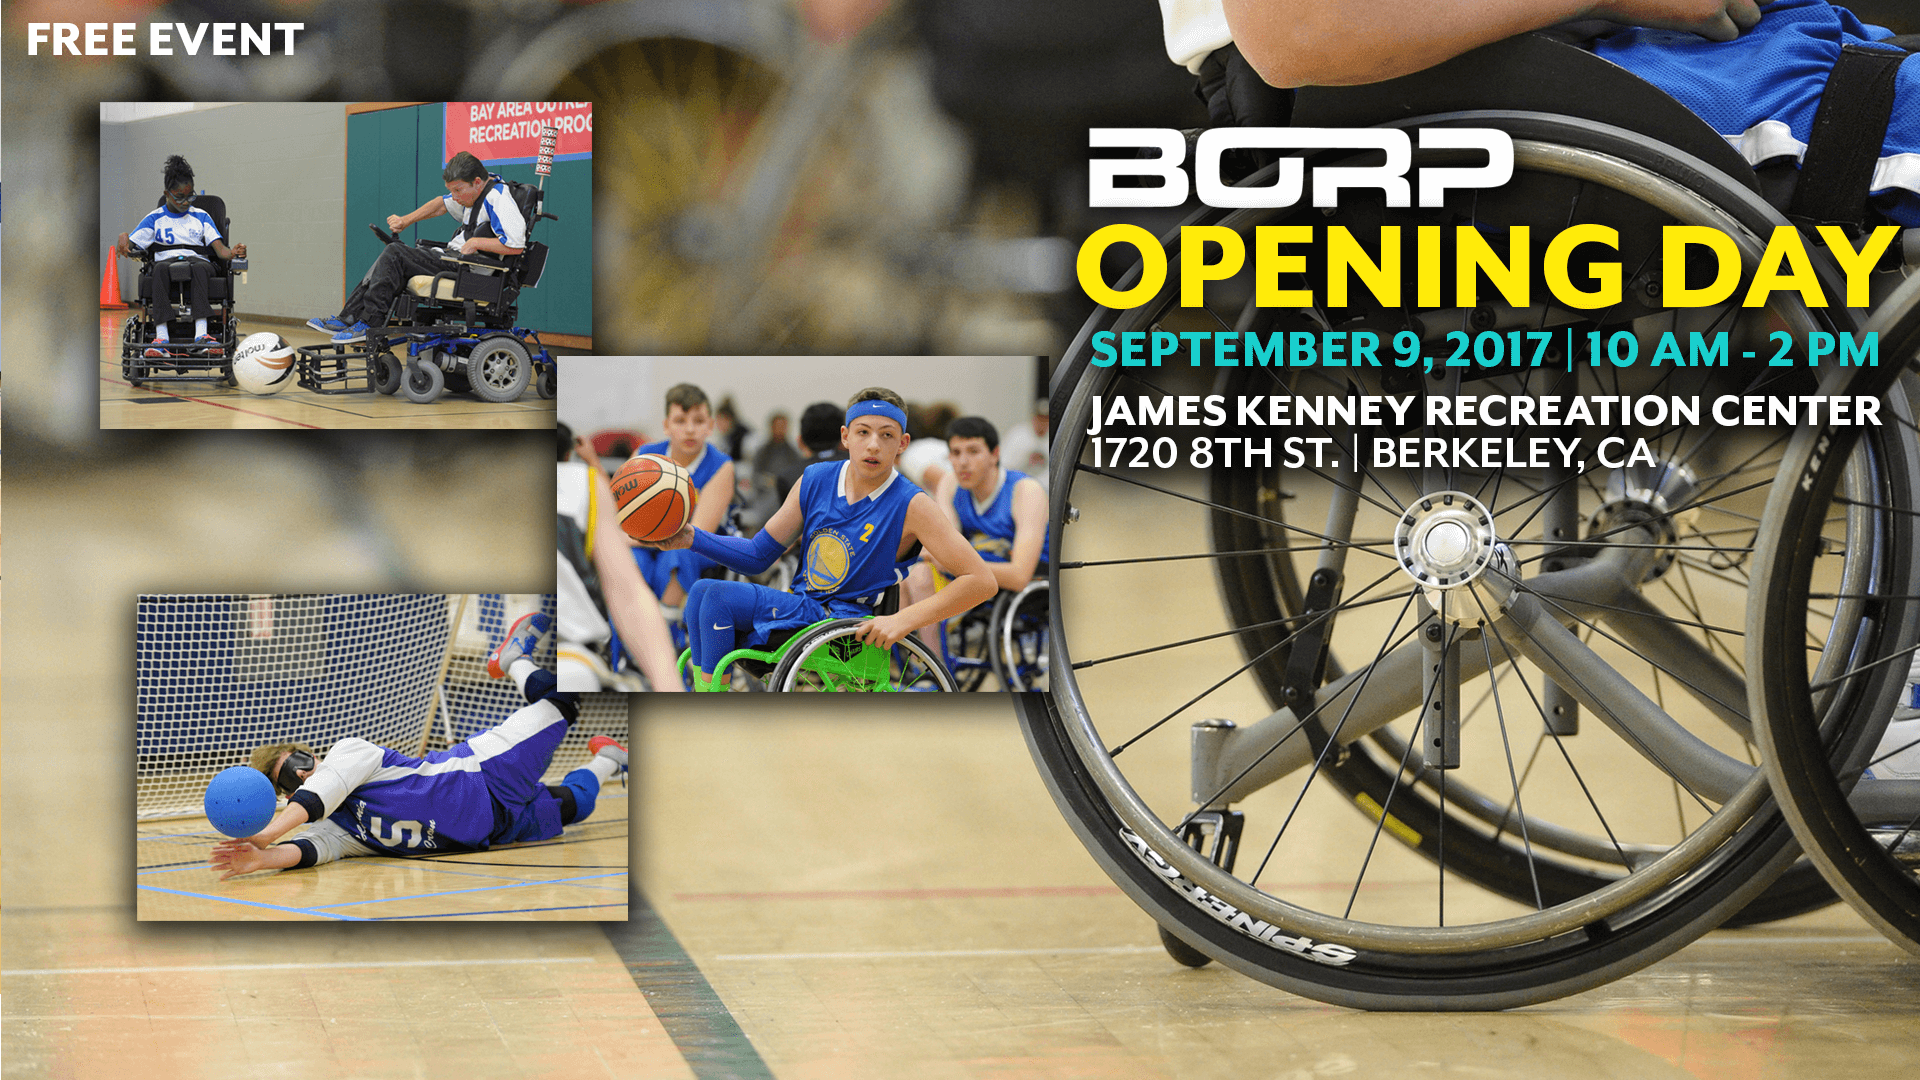 BORP Opening Day - September 9, 2017 - James Kenney Recreation Center 1720 Eighth Street Berkeley, CA 94710 | Picture of Power Soccer players, Wheelchair Basketball, and Goalball